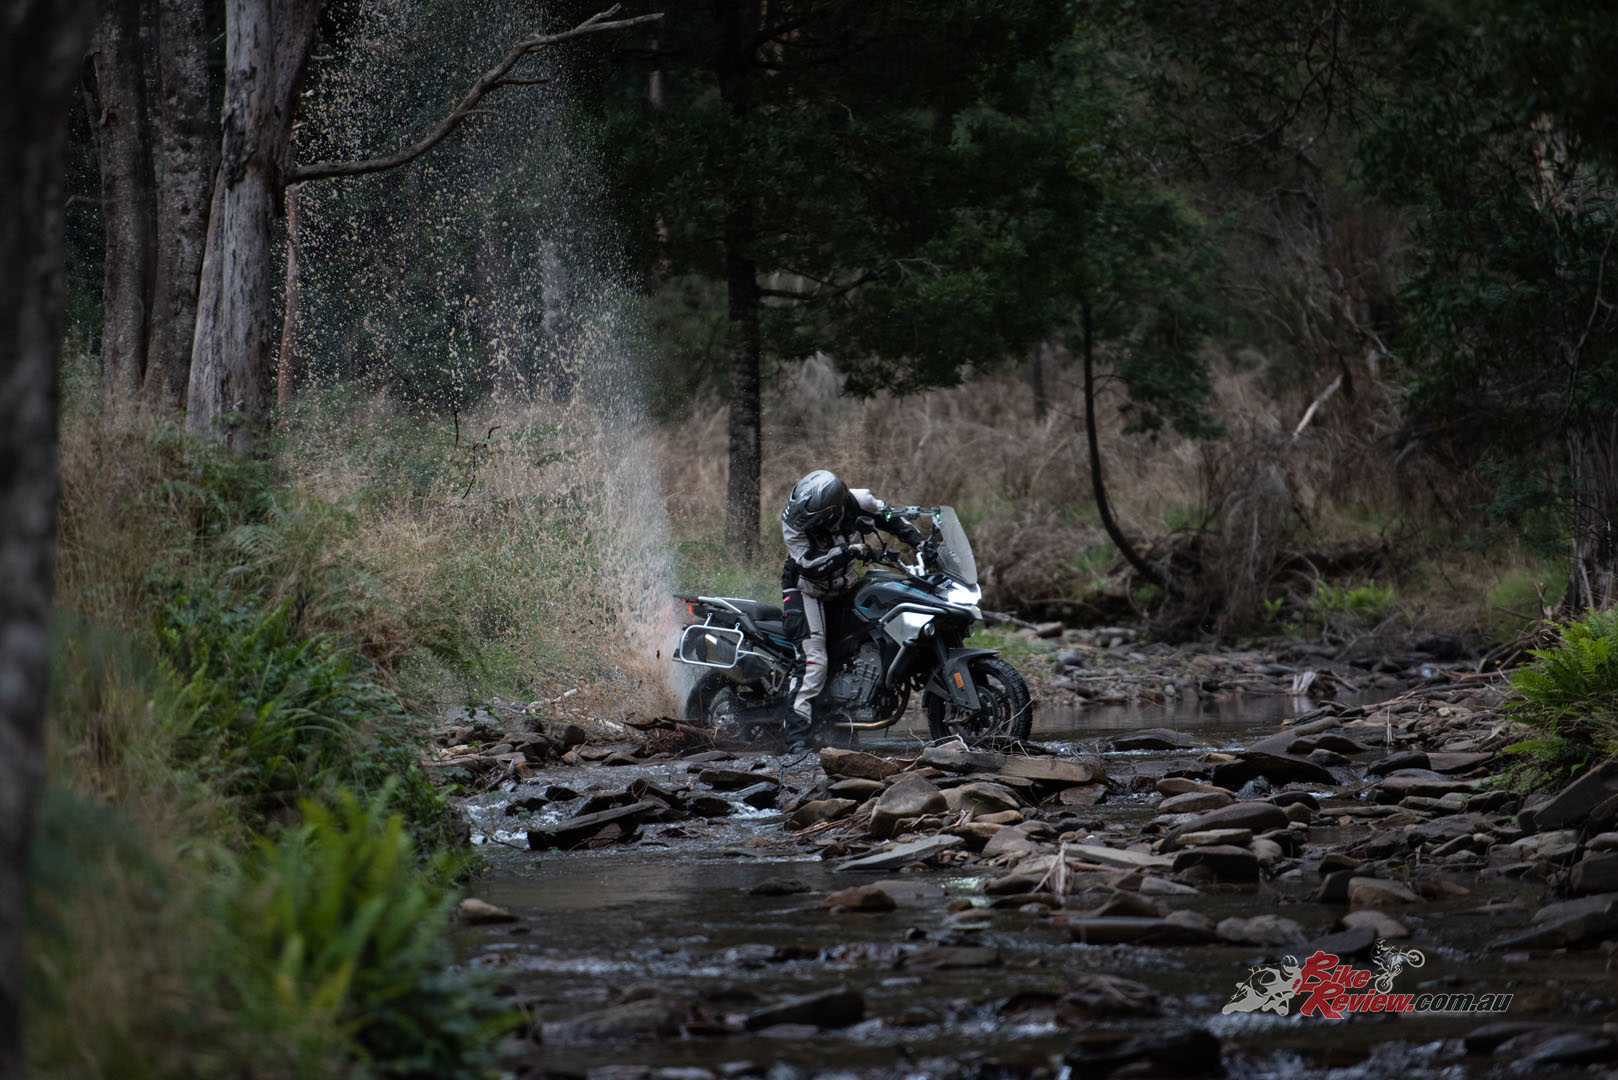 Nick is used to light enduro bikes. Causing him to get stuck in a few spots on the 800MT, which is bulky in comparison!